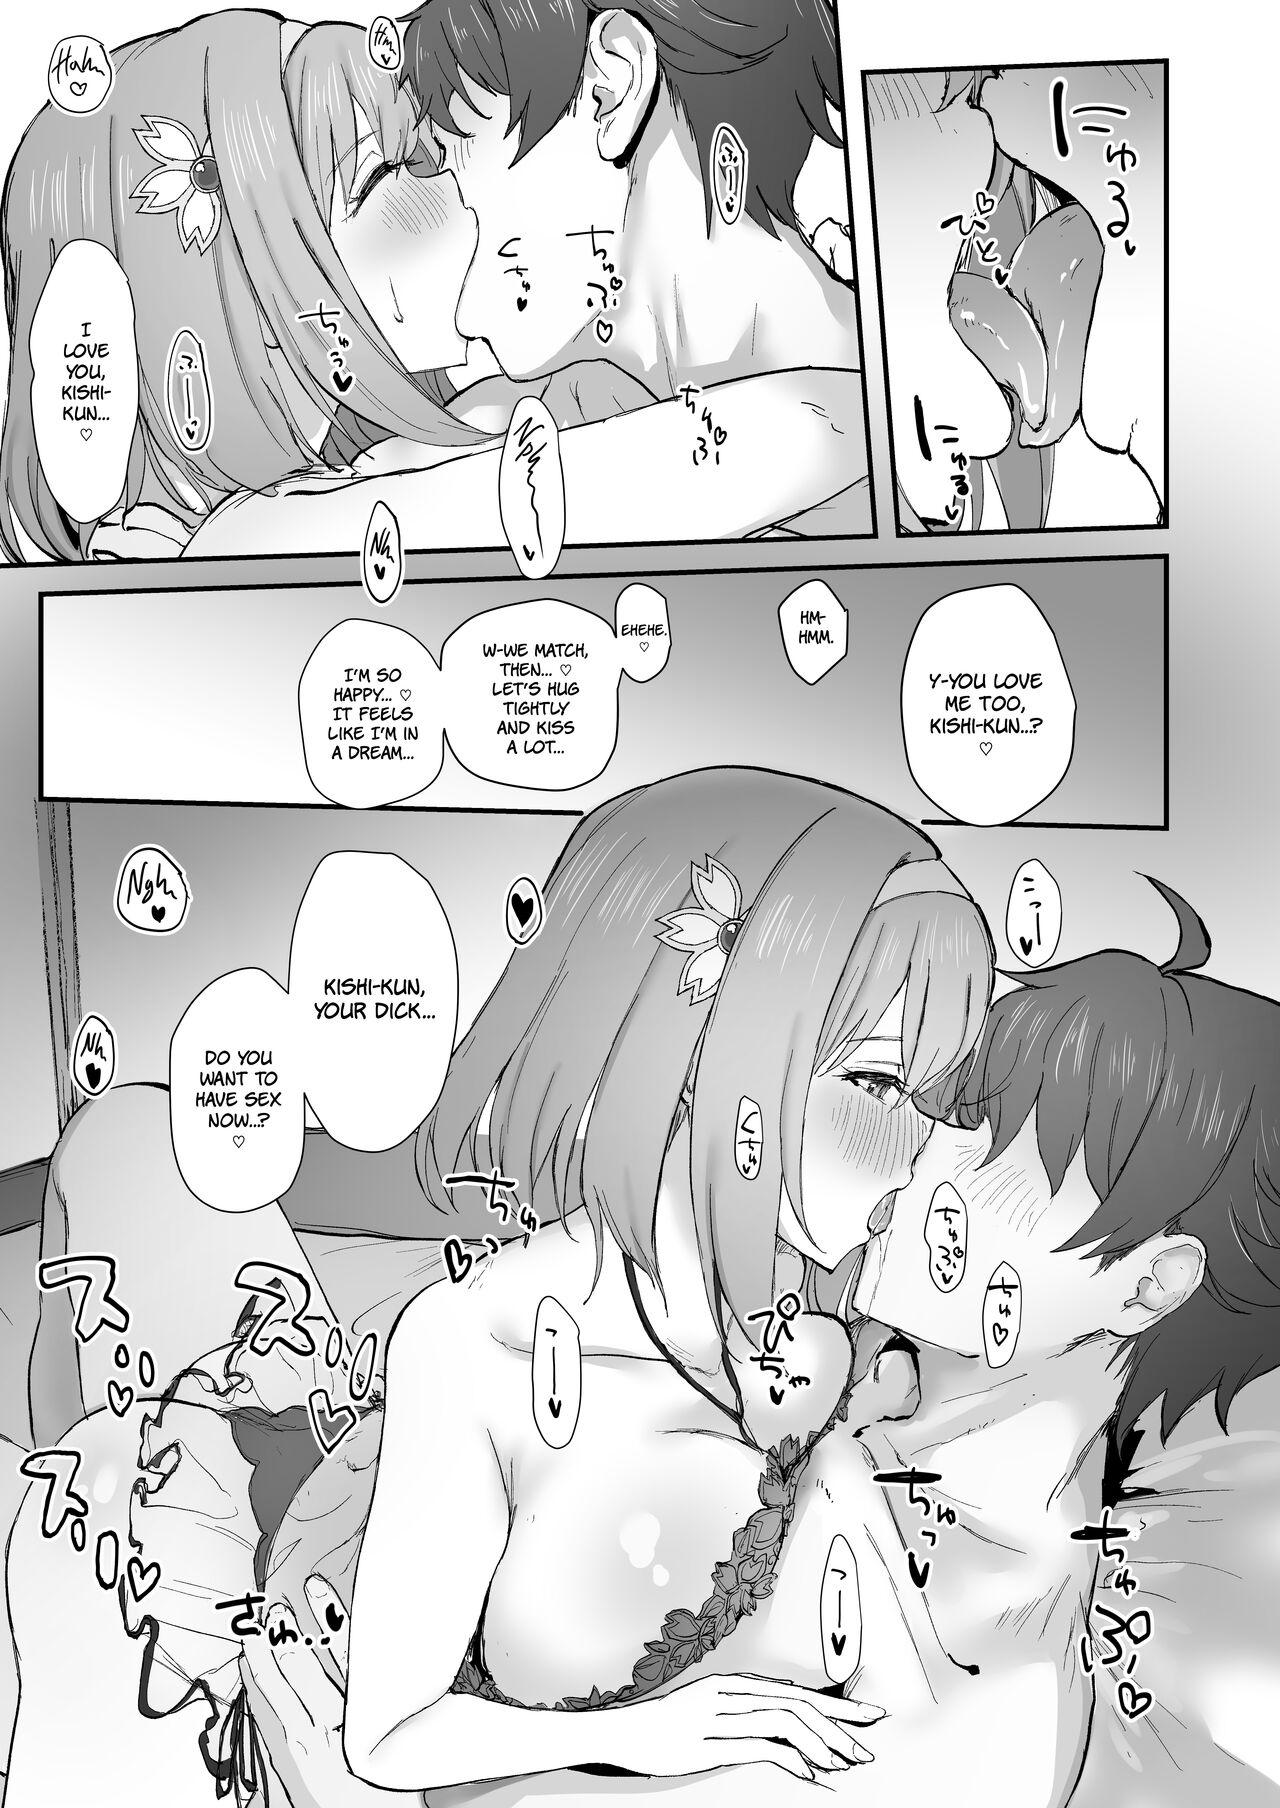 Gloryhole Yui to Icha Love Ecchi Suru hon | A Book About Making Sweet Love with Yui - Princess connect Star - Page 7